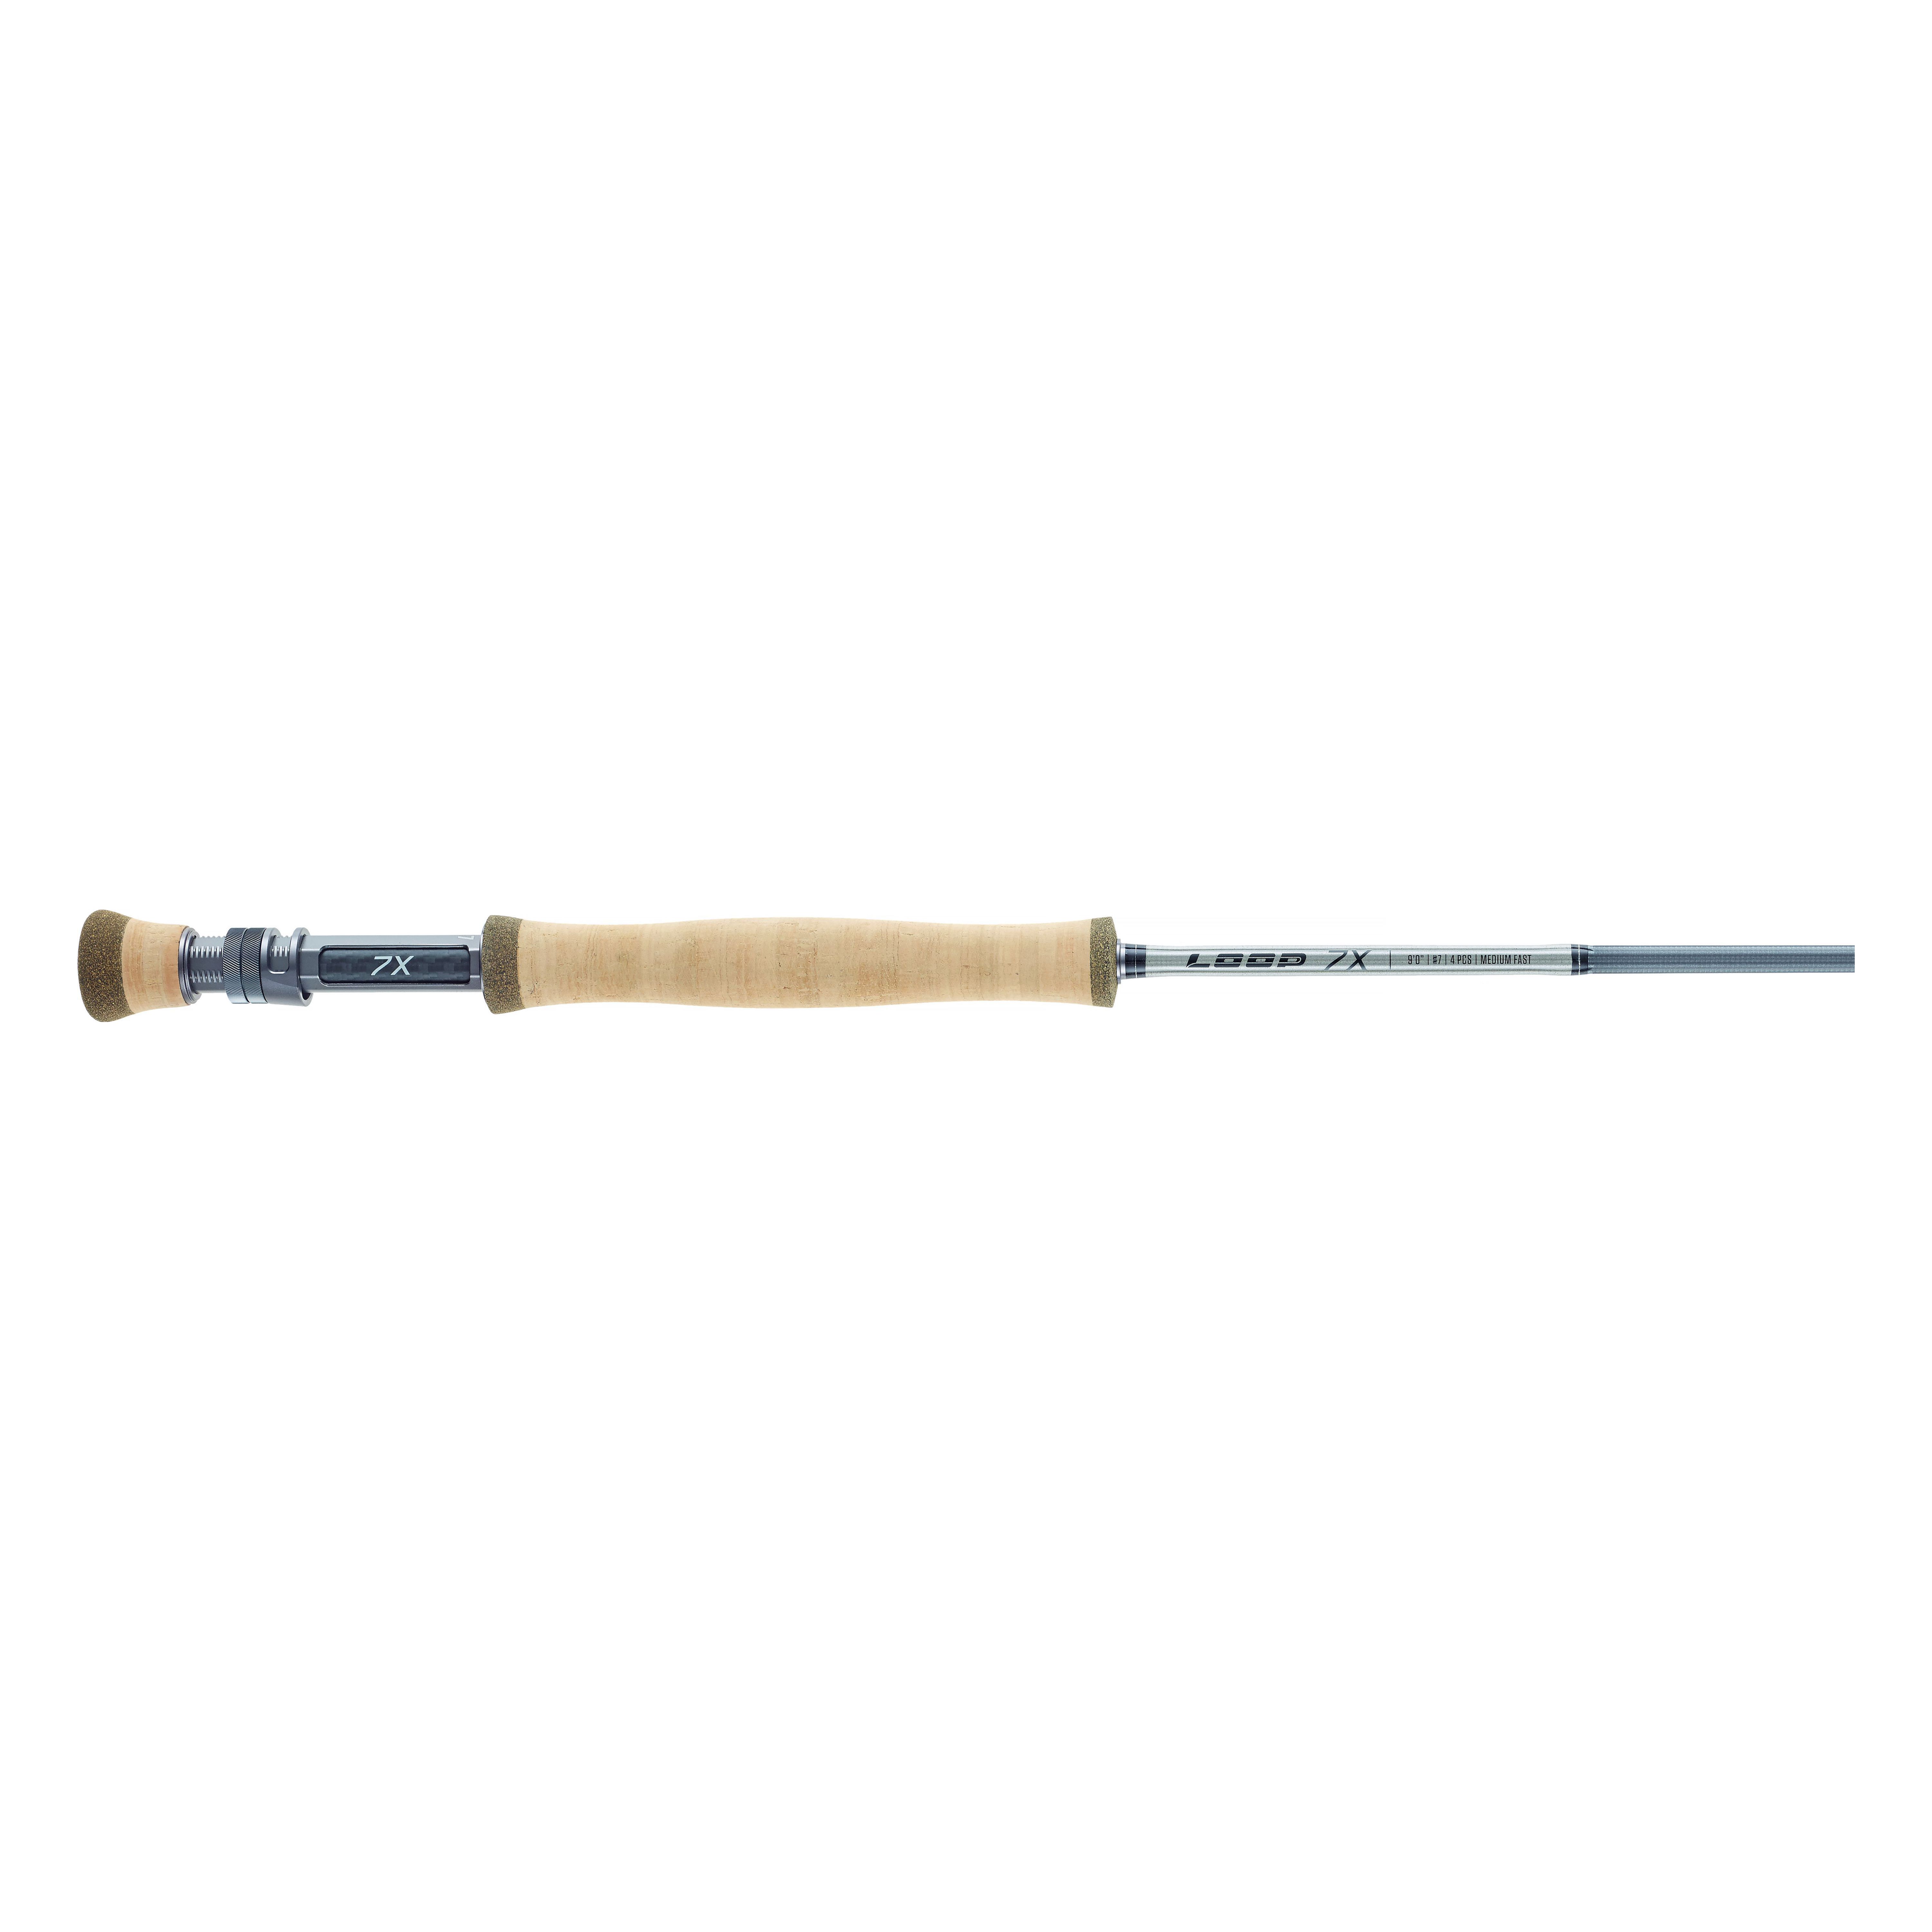 LOOP 7X Single Hand Rod Medium Fast & Fast Action - Atlantic Rivers  Outfitting Company